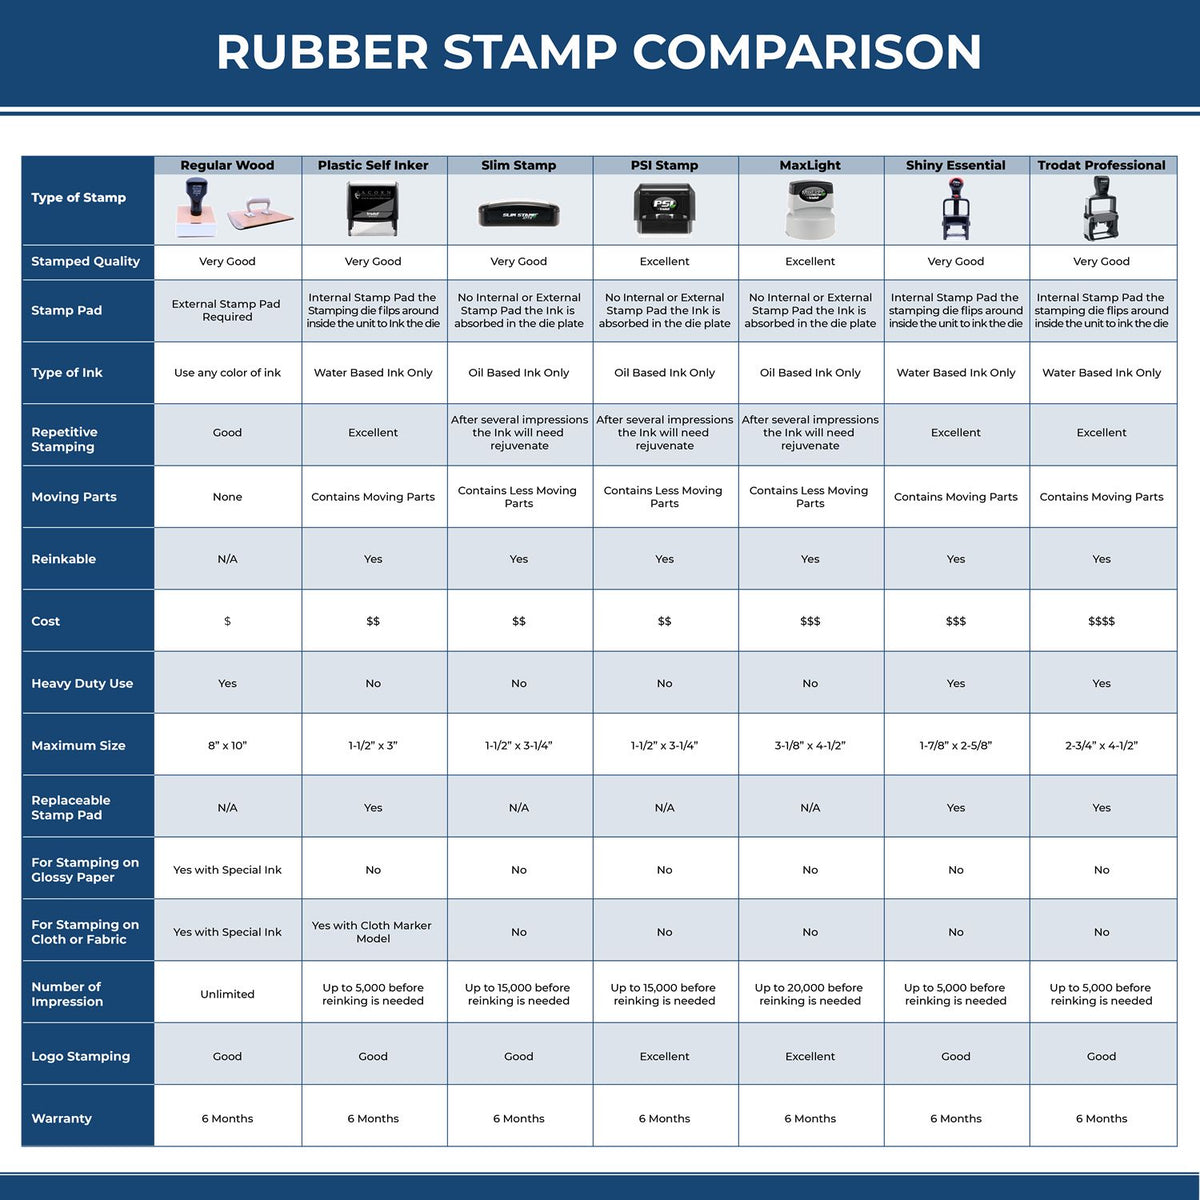 A comparison chart for the different types of mount models available for the Wooden Handle Minnesota State Seal Notary Public Stamp.